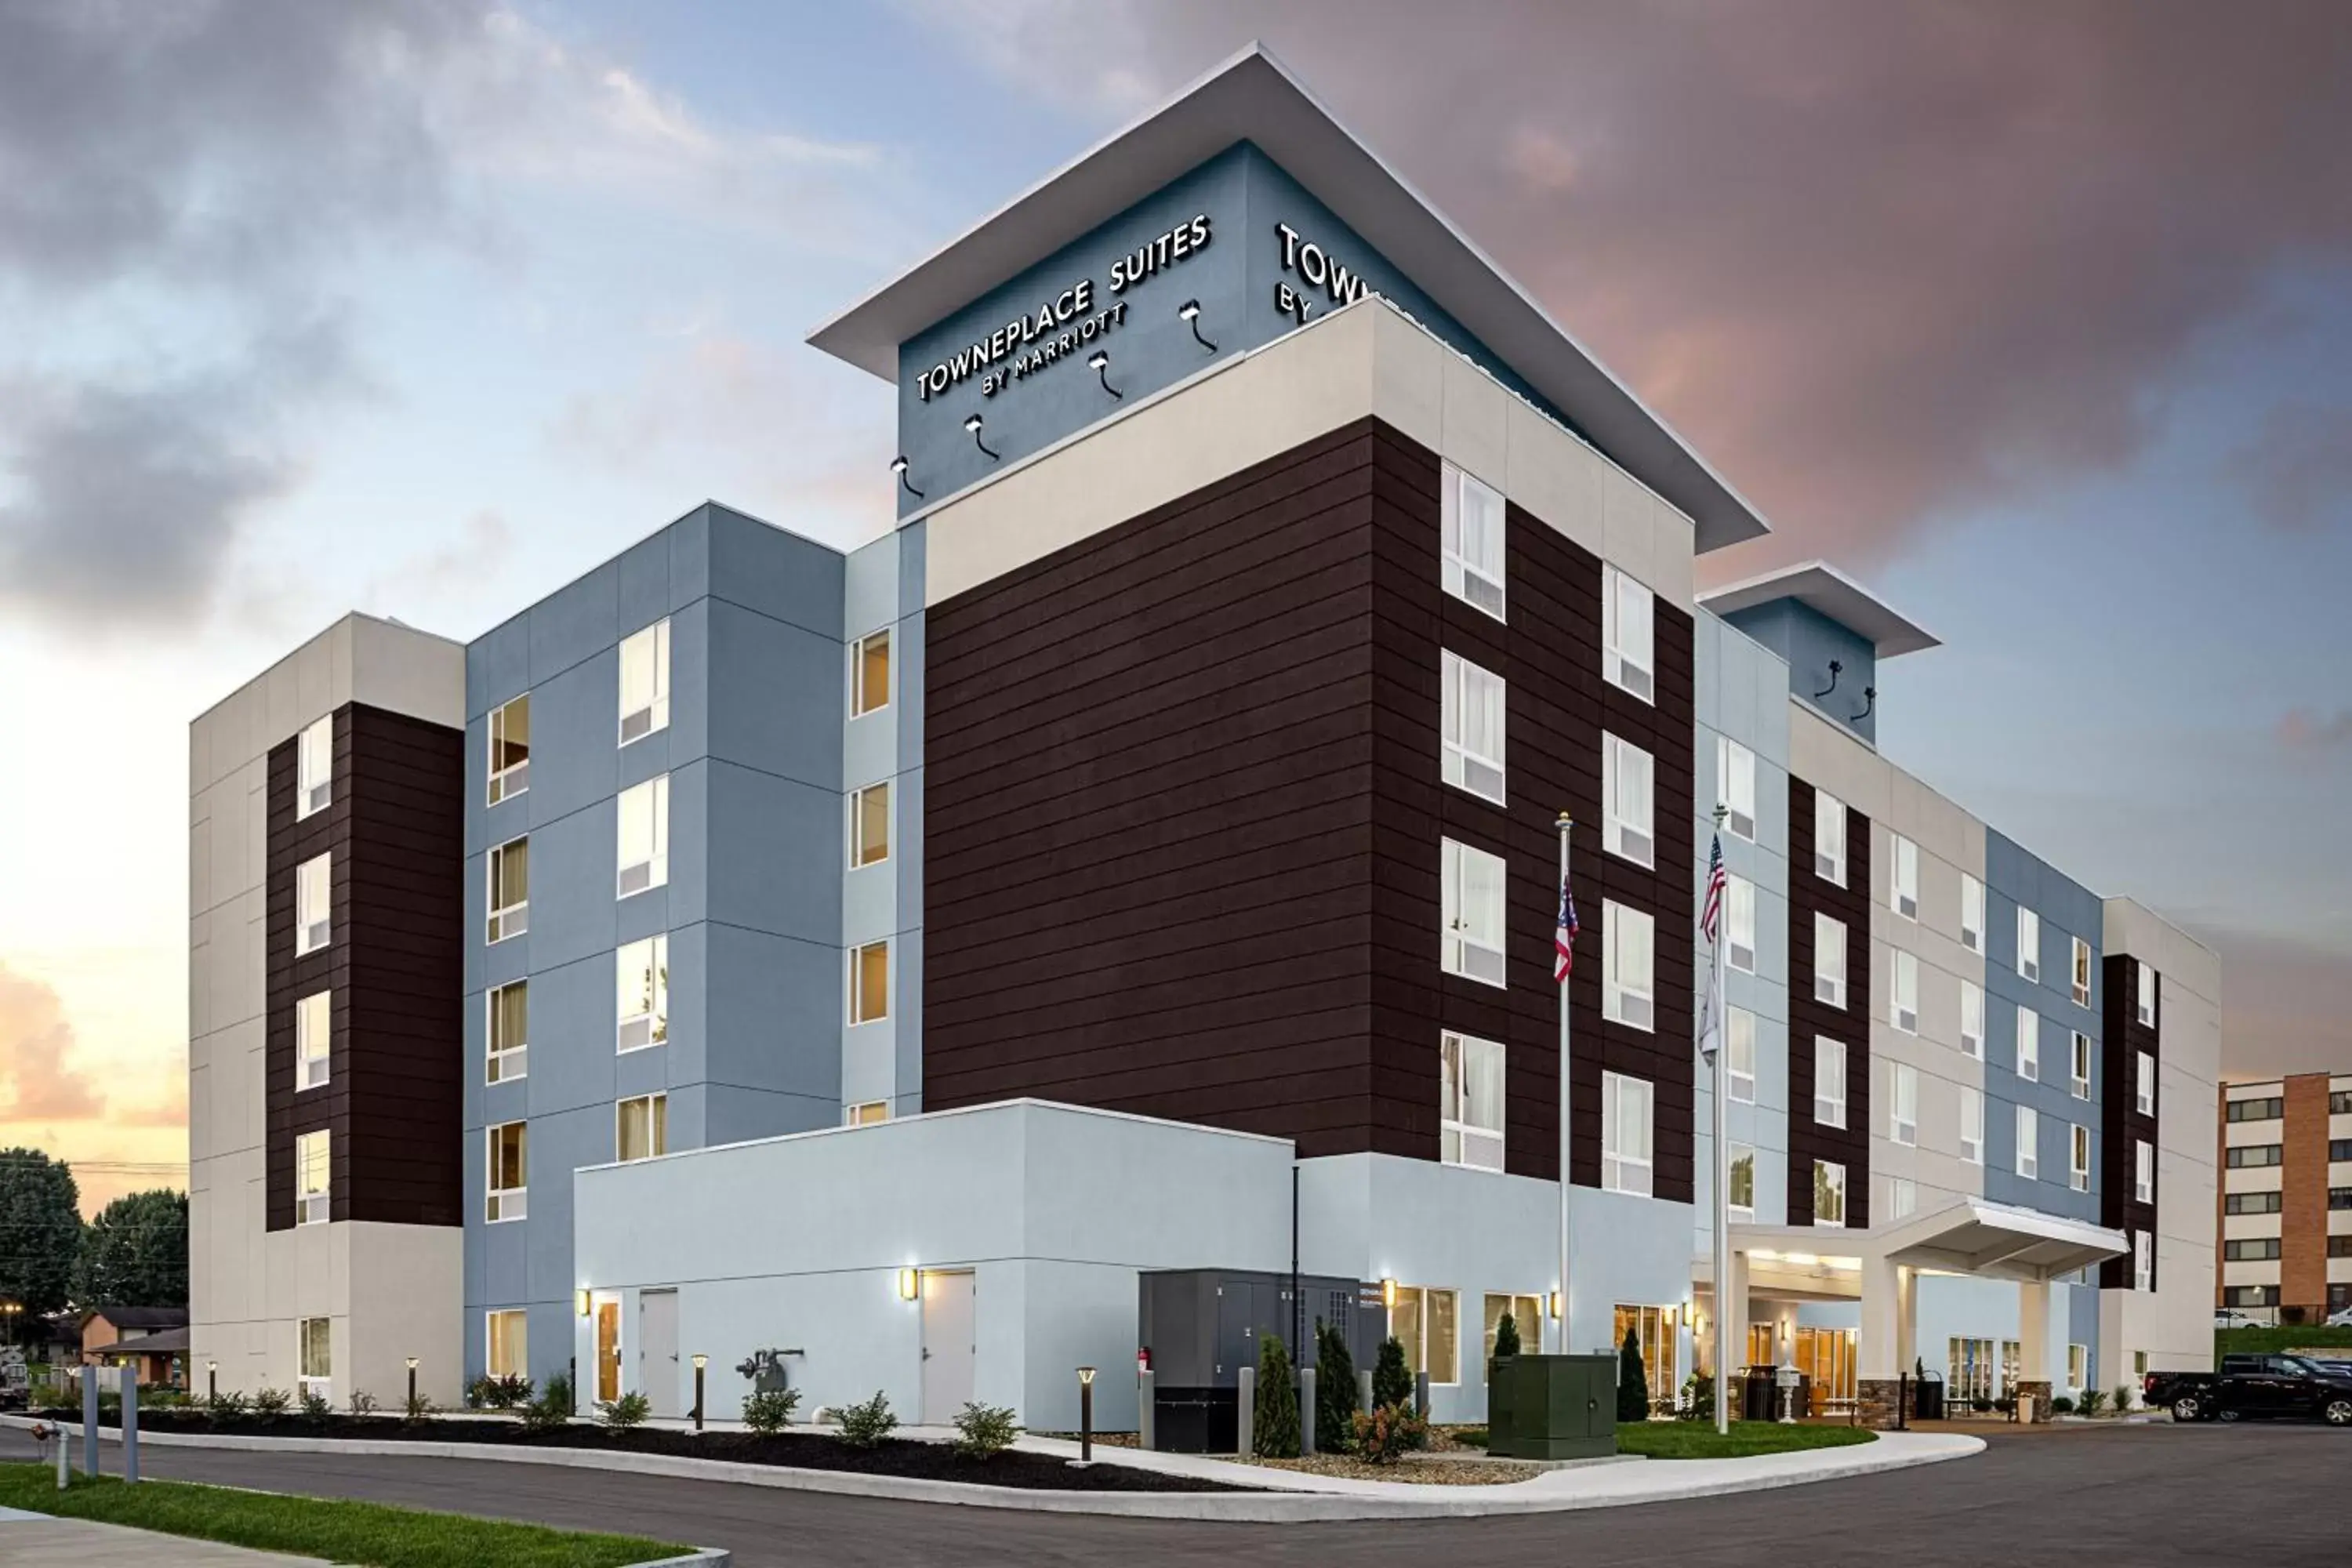 Property Building in TownePlace Suites by Marriott Ironton